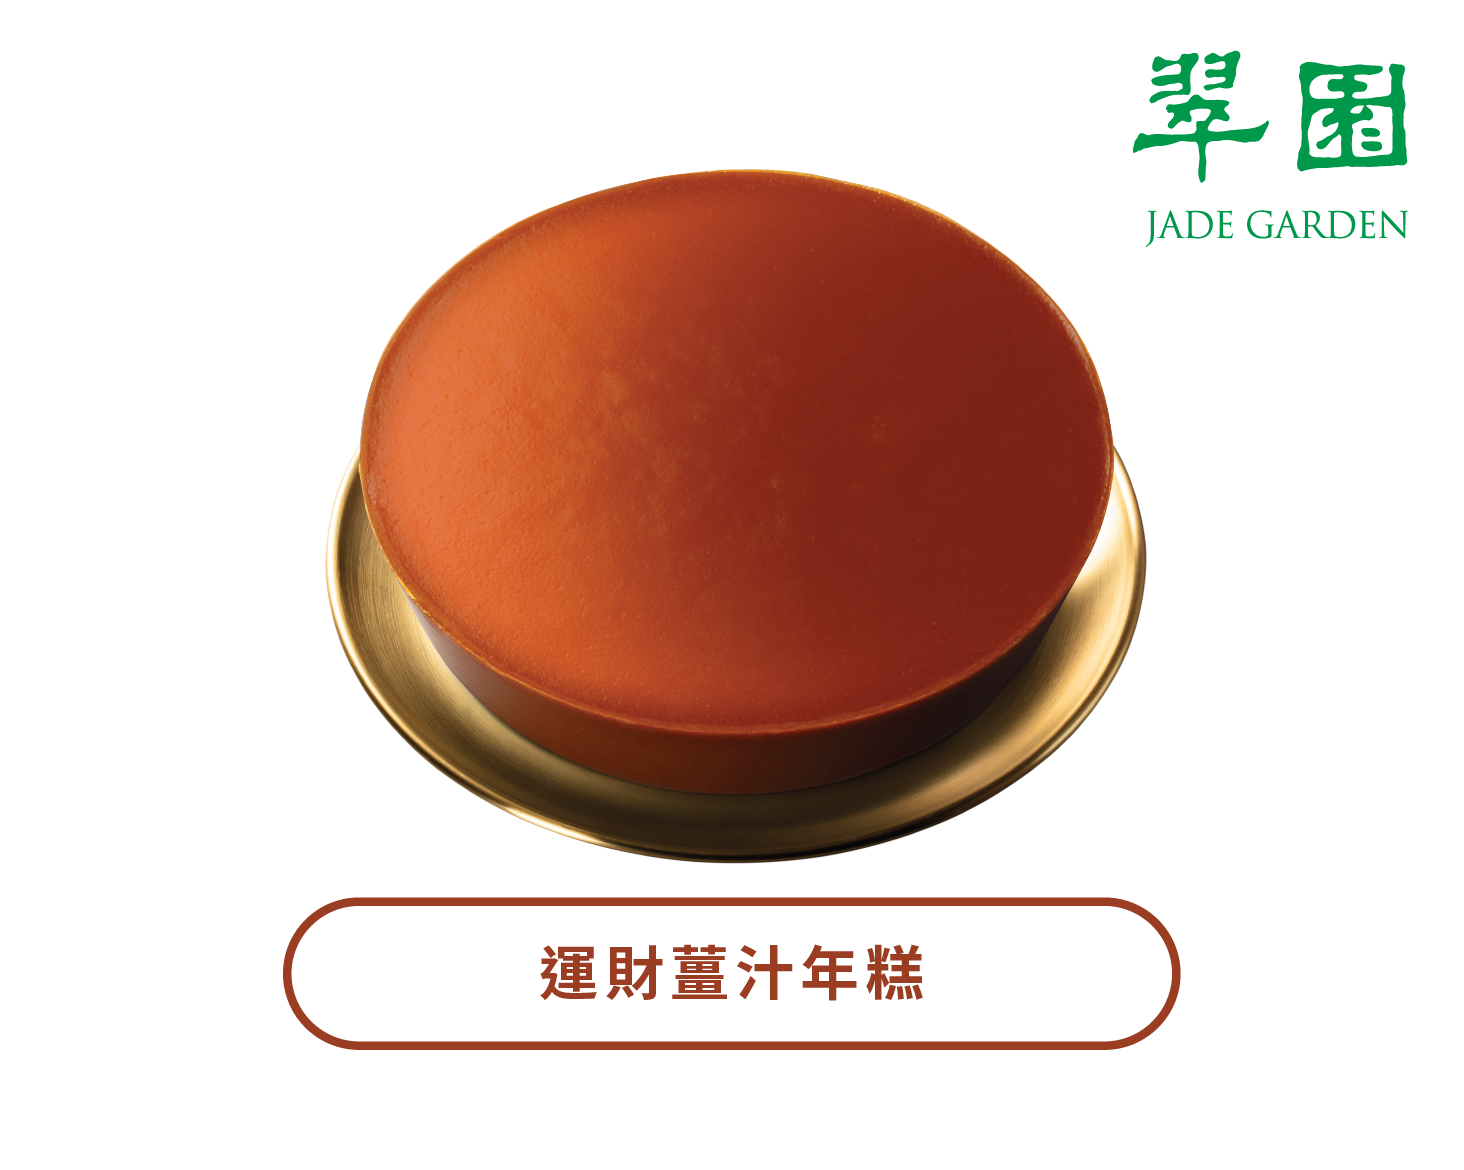 JADE GARDEN | Chinese New Year Pudding with Ginger (Physical Coupon)